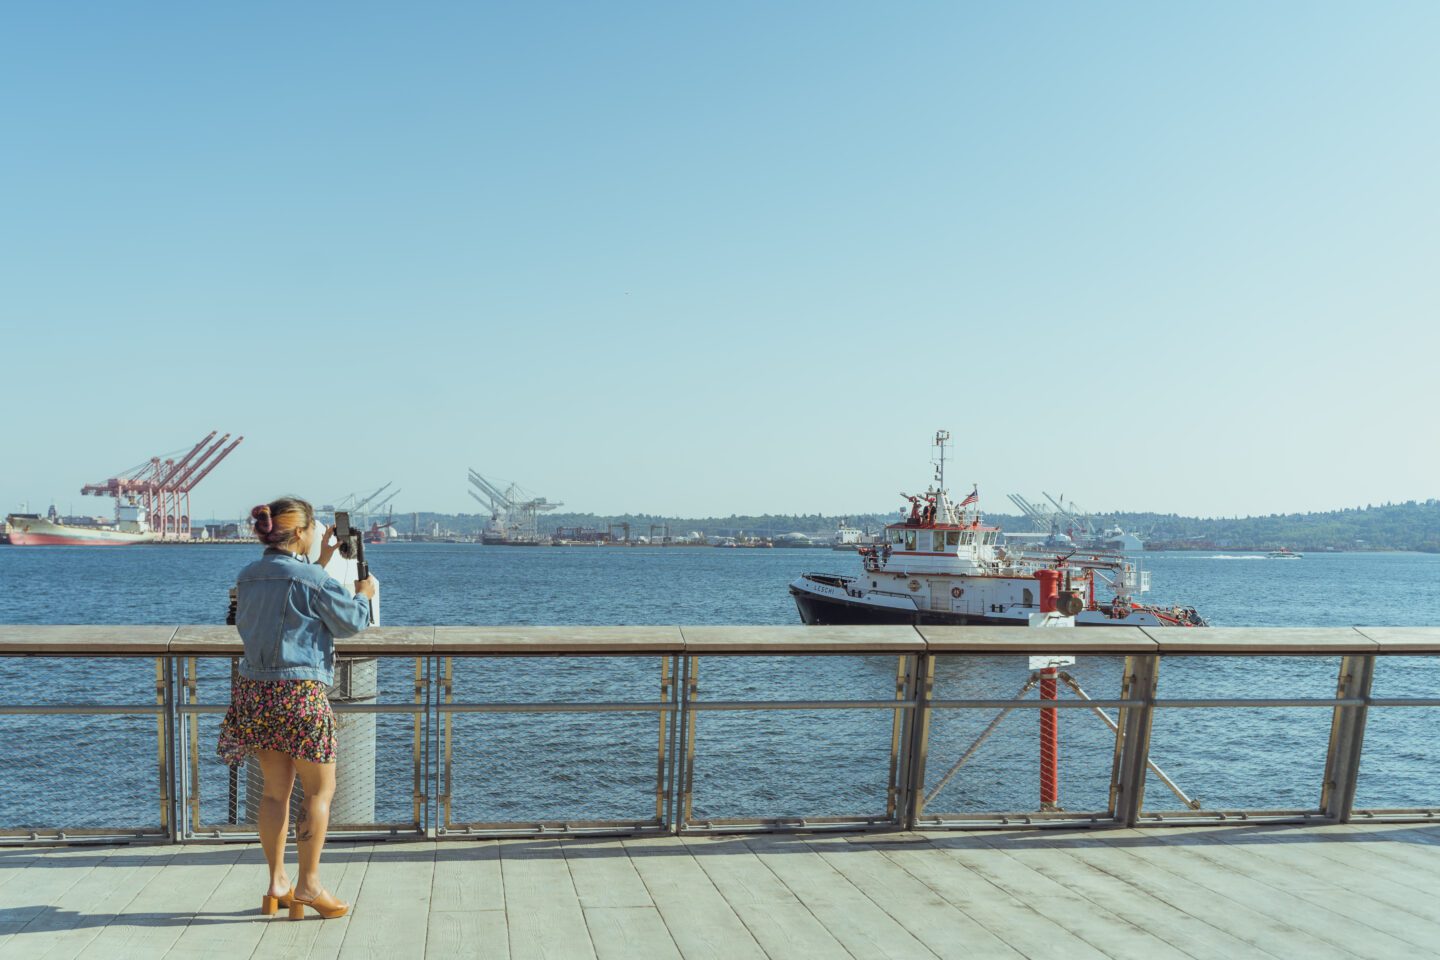 A woman with a camera looks out at Elliott Bay from Pier 62. A ship can be seen on the water against a blue sky and the Olympic mountain range. Photo by Jo Cosme.